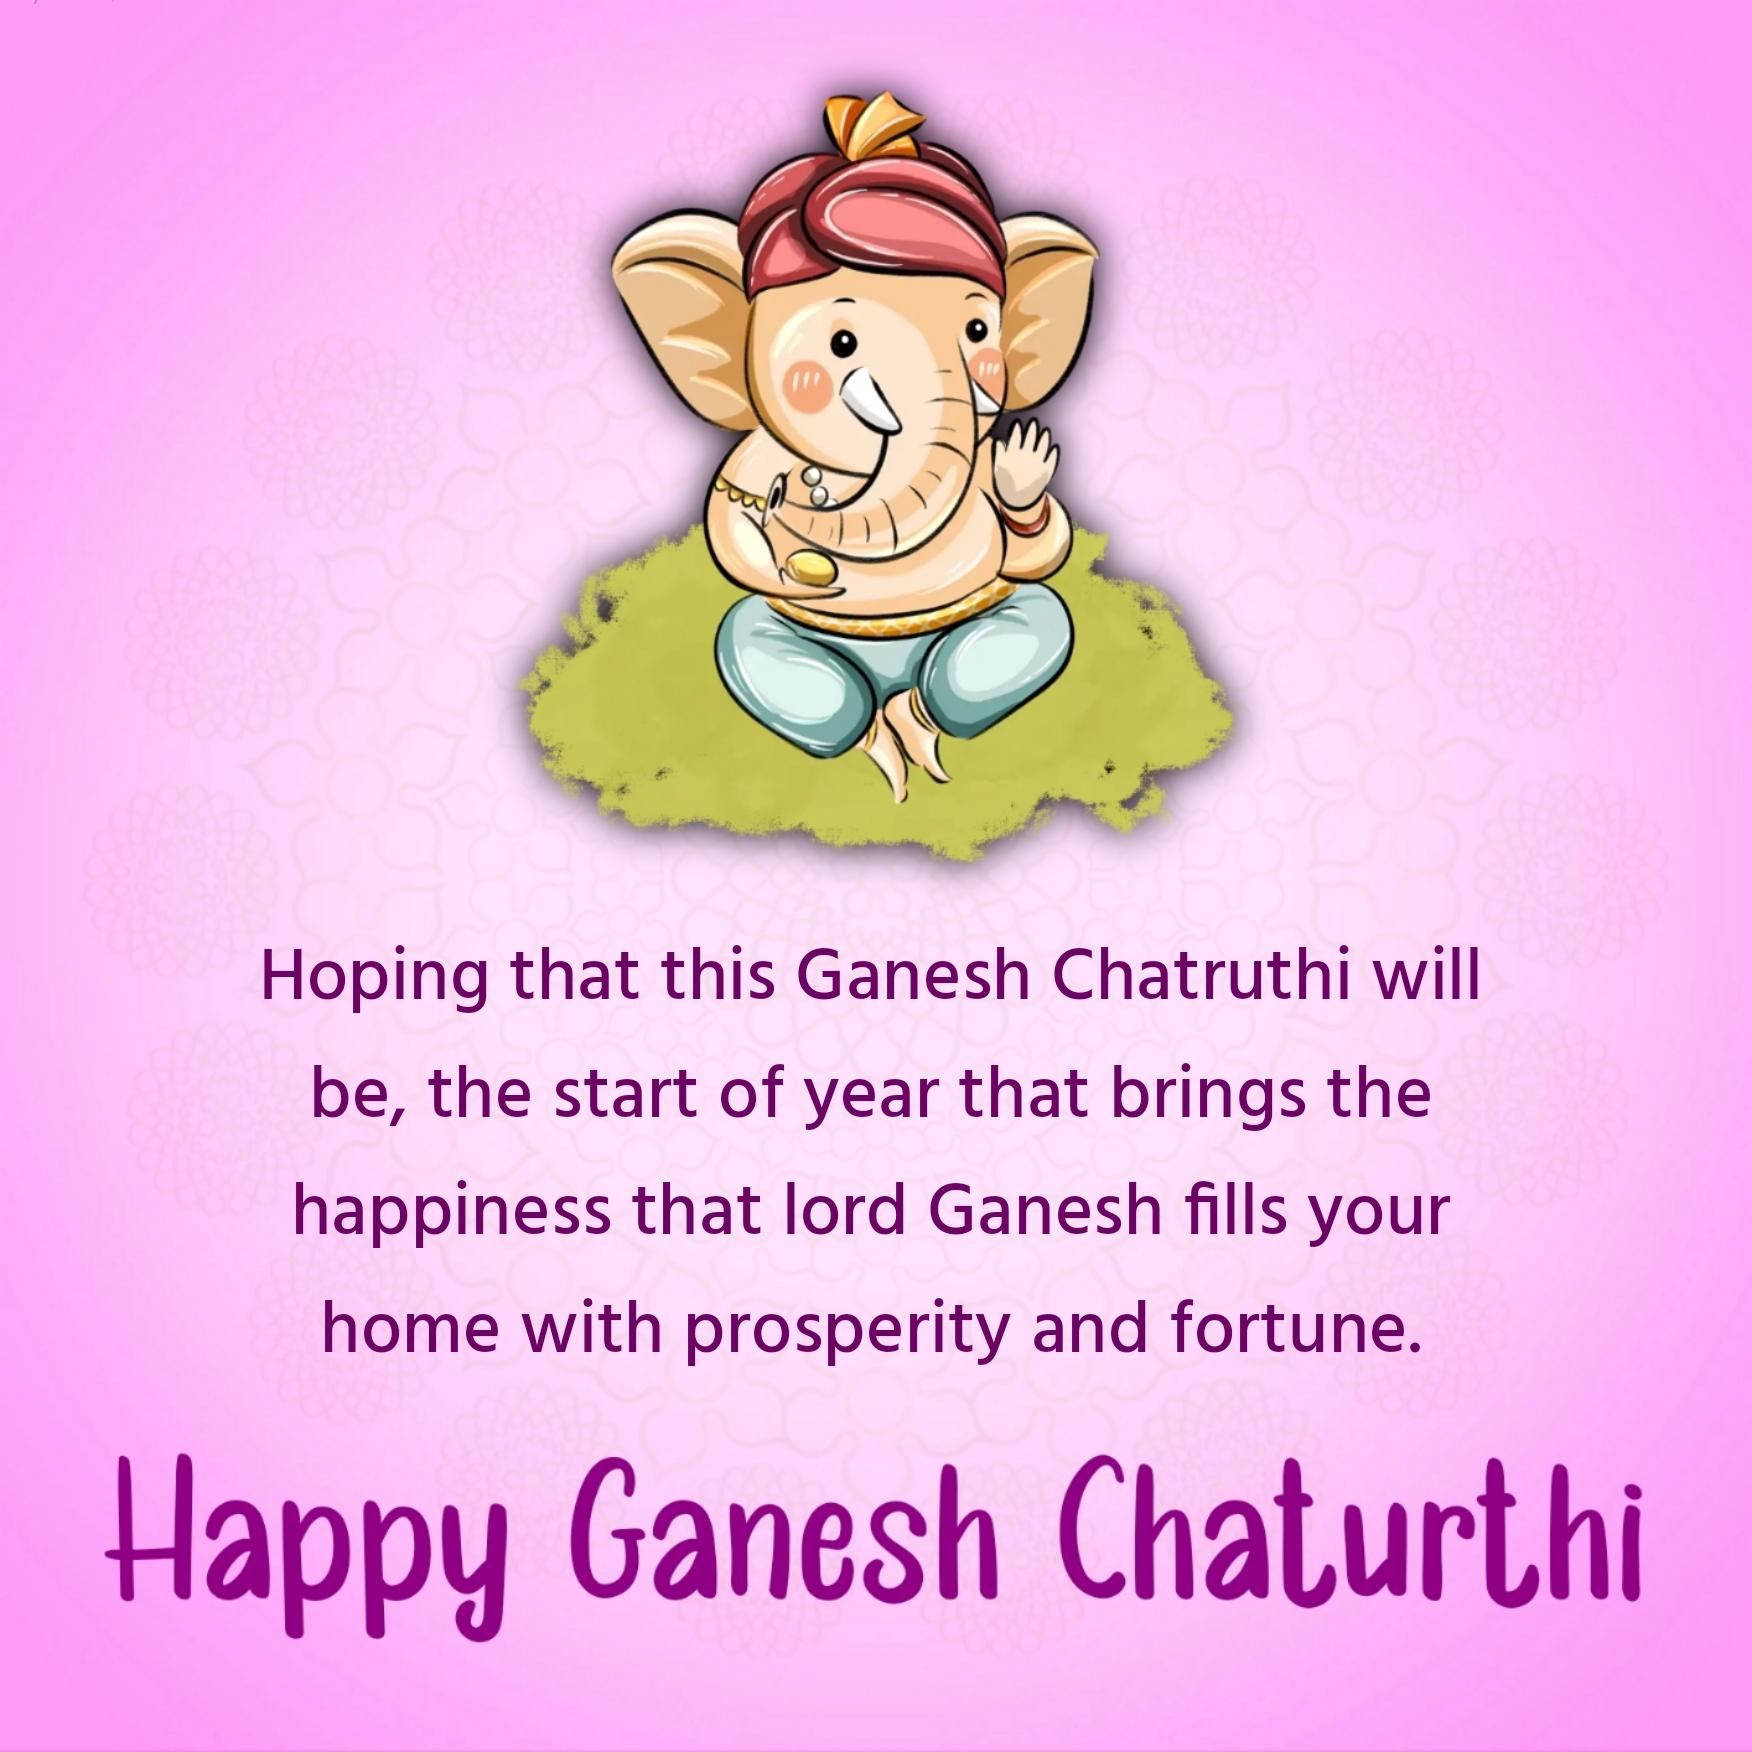 Hoping that this Ganesh Chatruthi will be